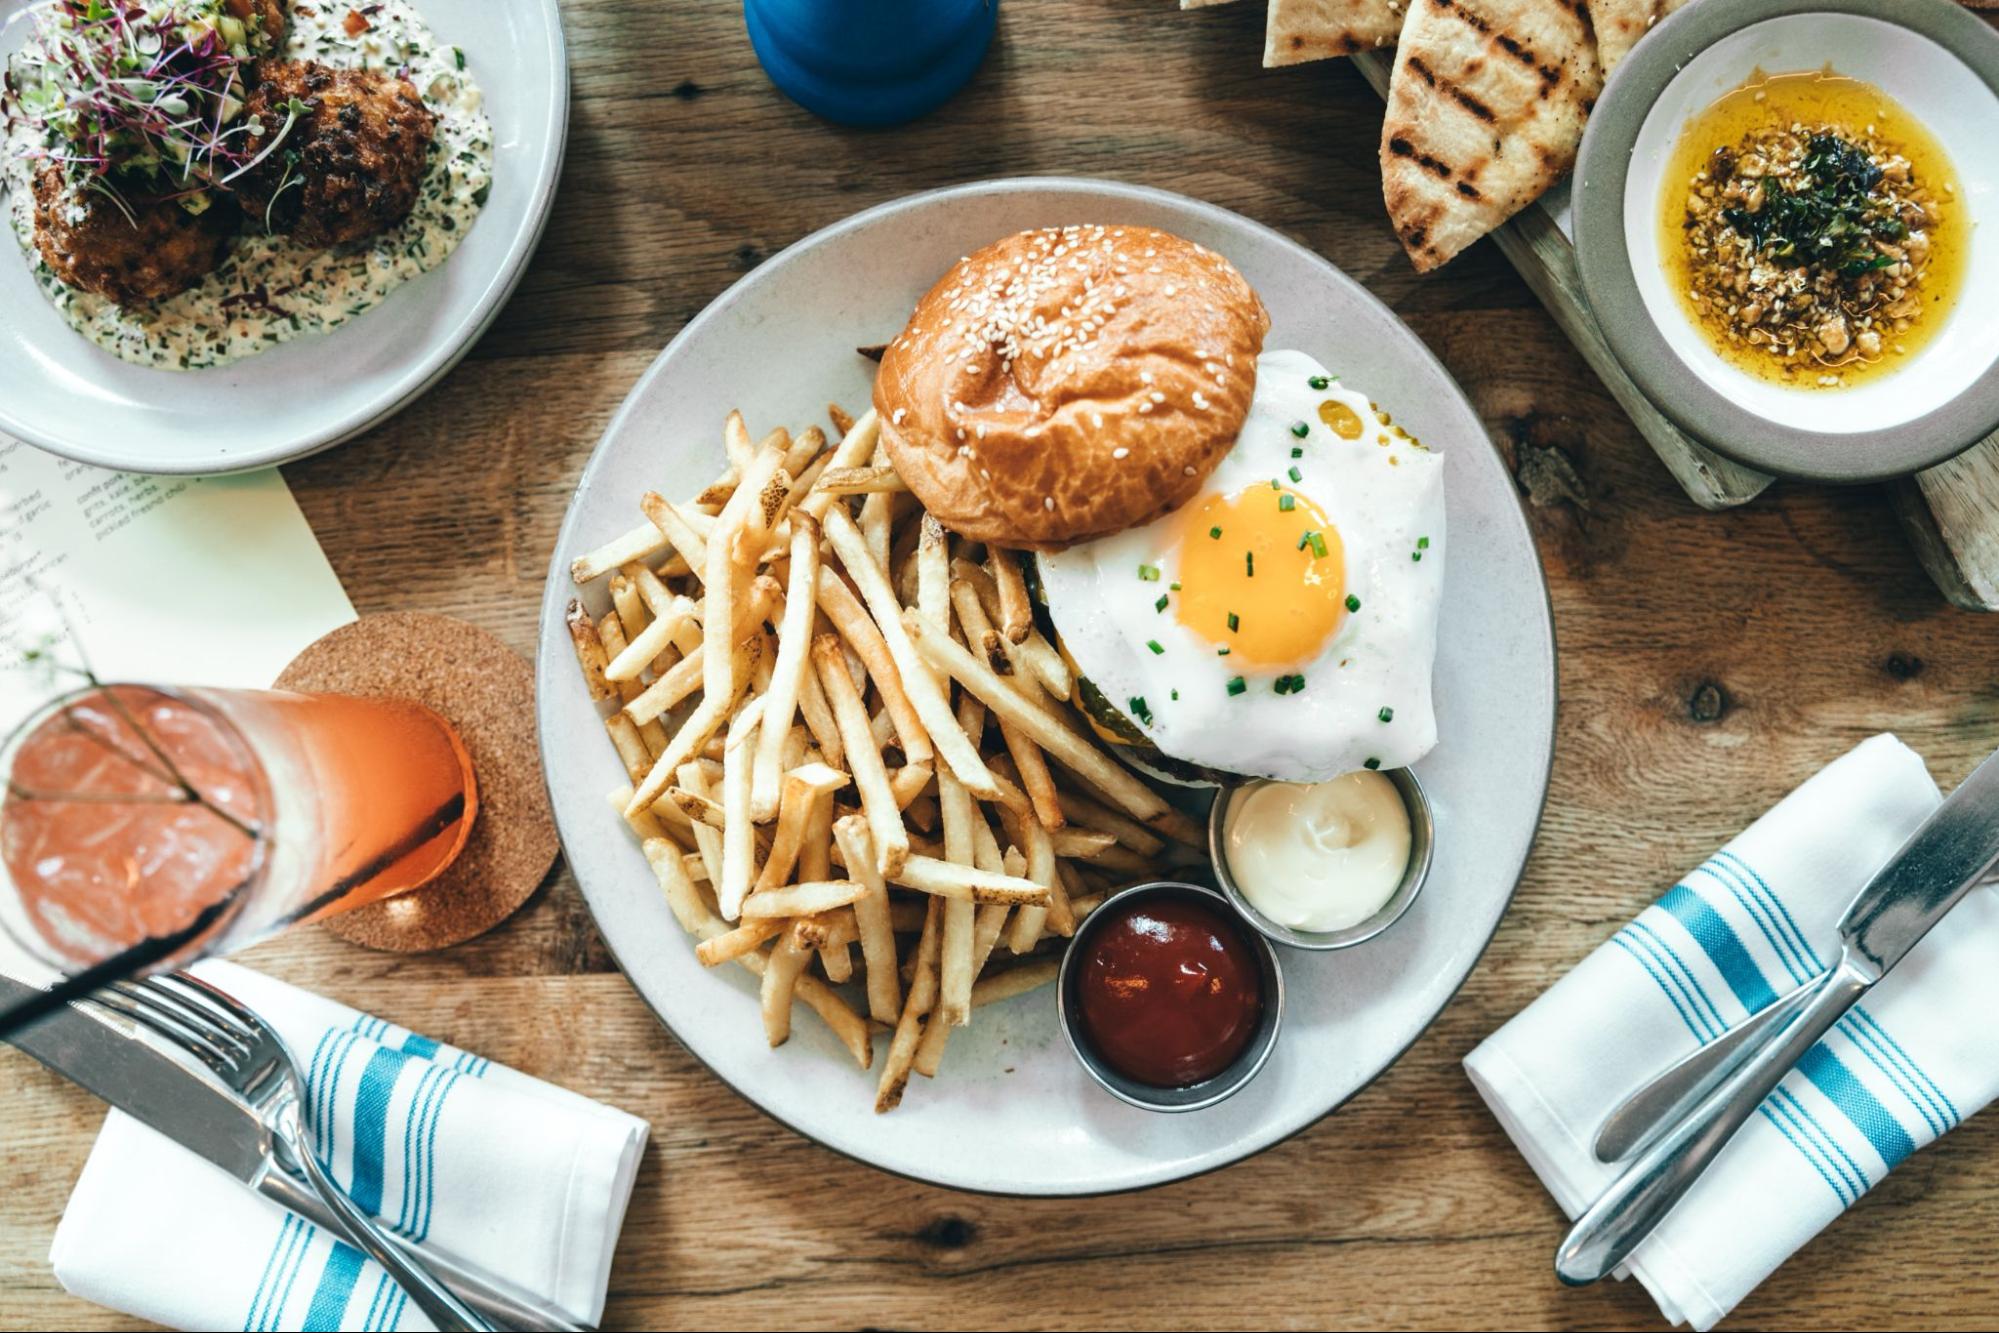 Burger with egg and fries on a plate